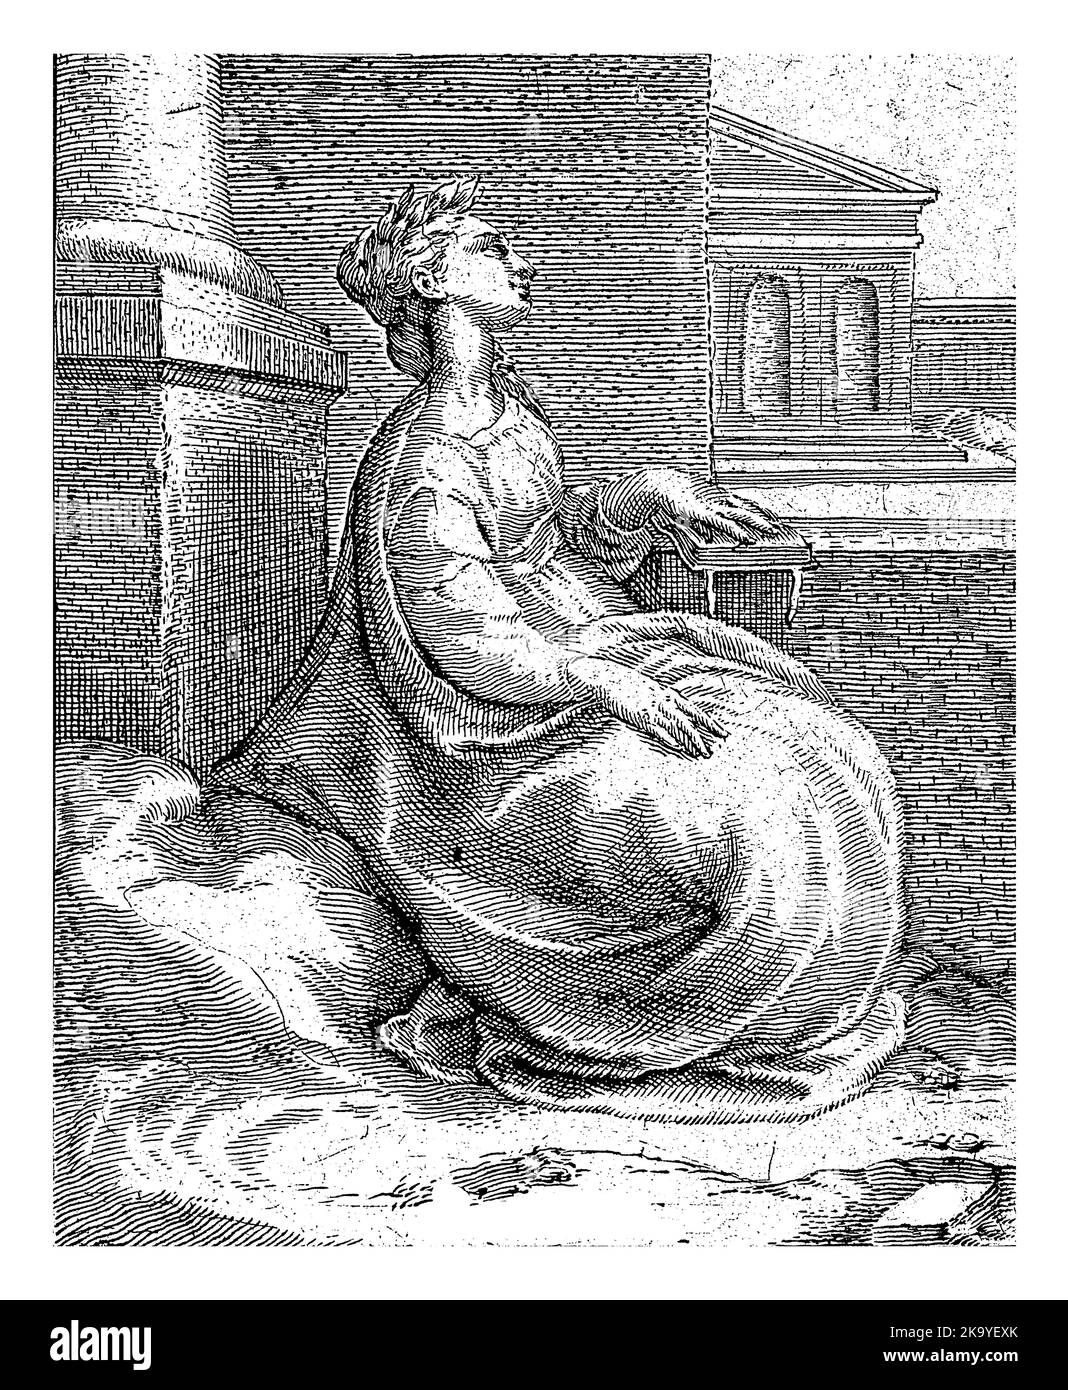 Piety, anonymous, after Jan Saenredam, after Hendrick Goltzius, 1601 - 1652 The personification of piety is part of a classical building. She wears a Stock Photo